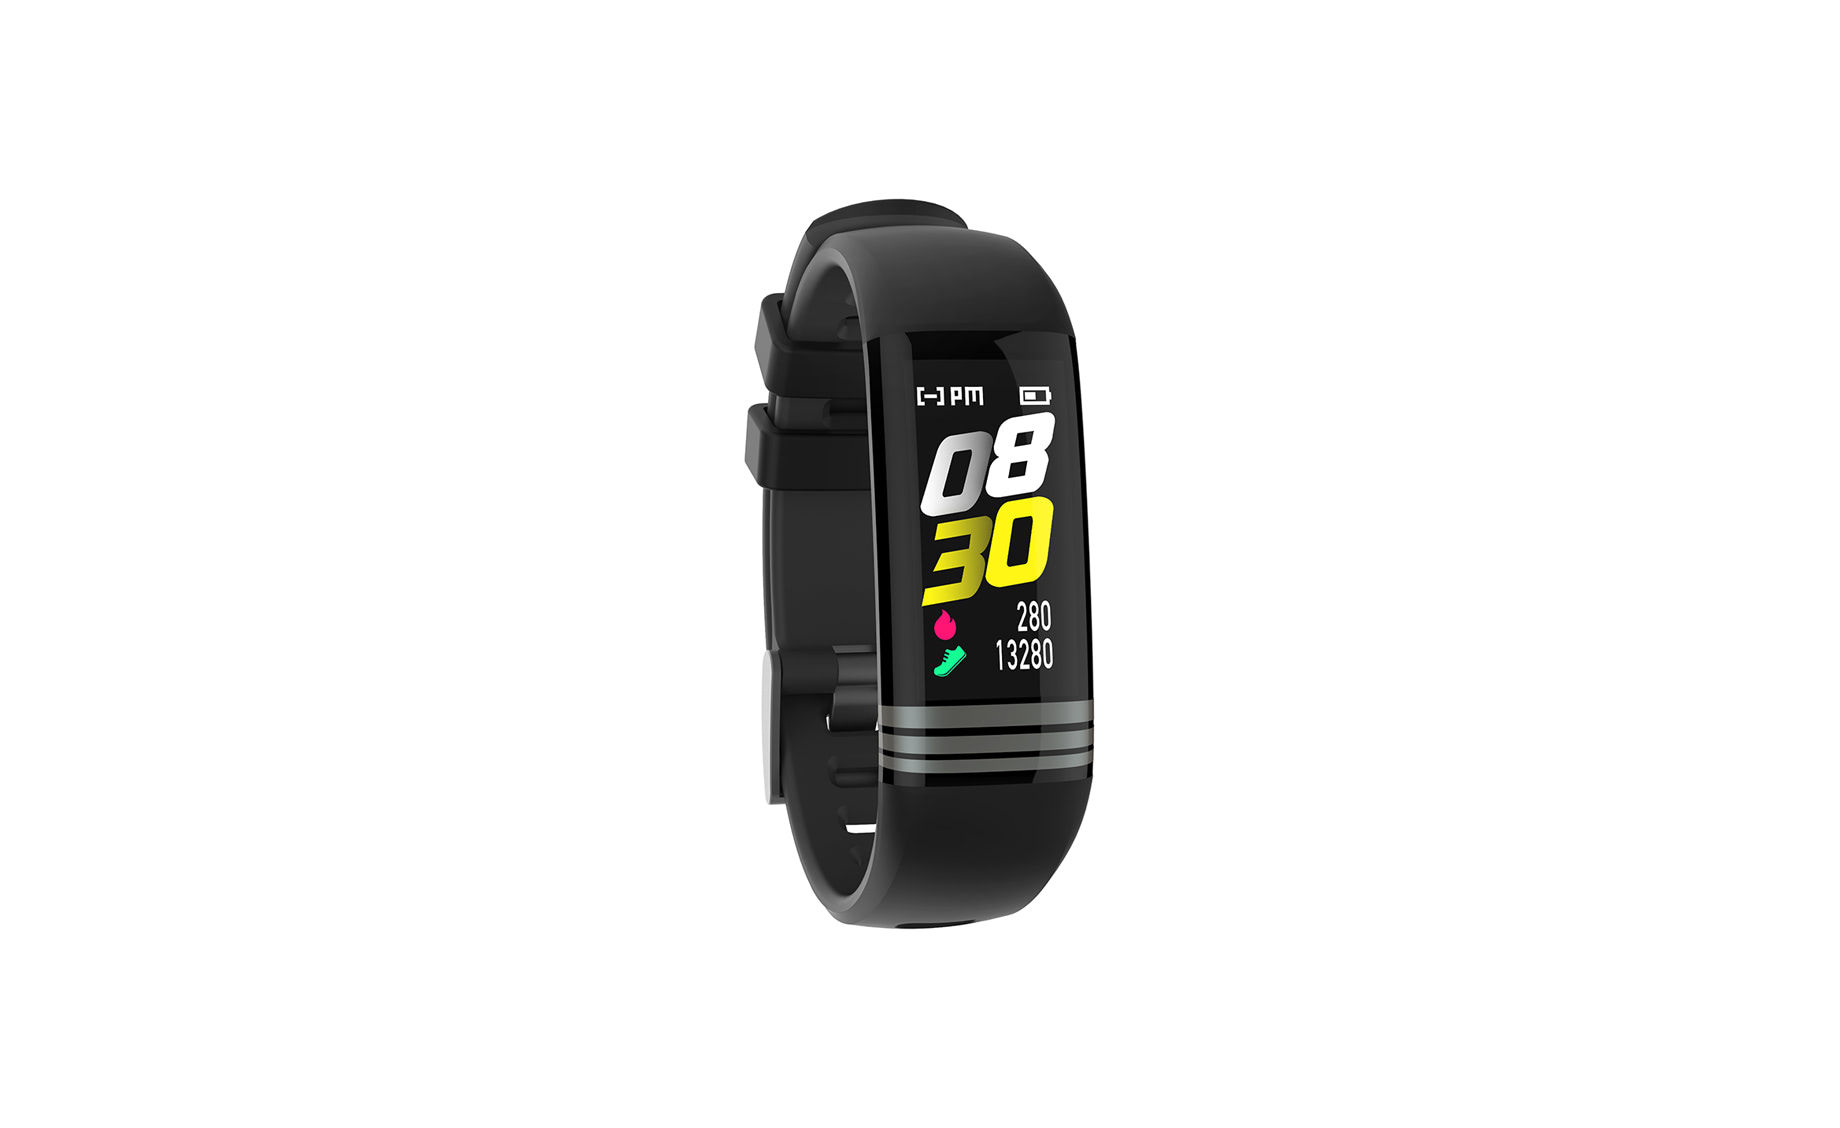 Meanit Smart Watch M10 Termo